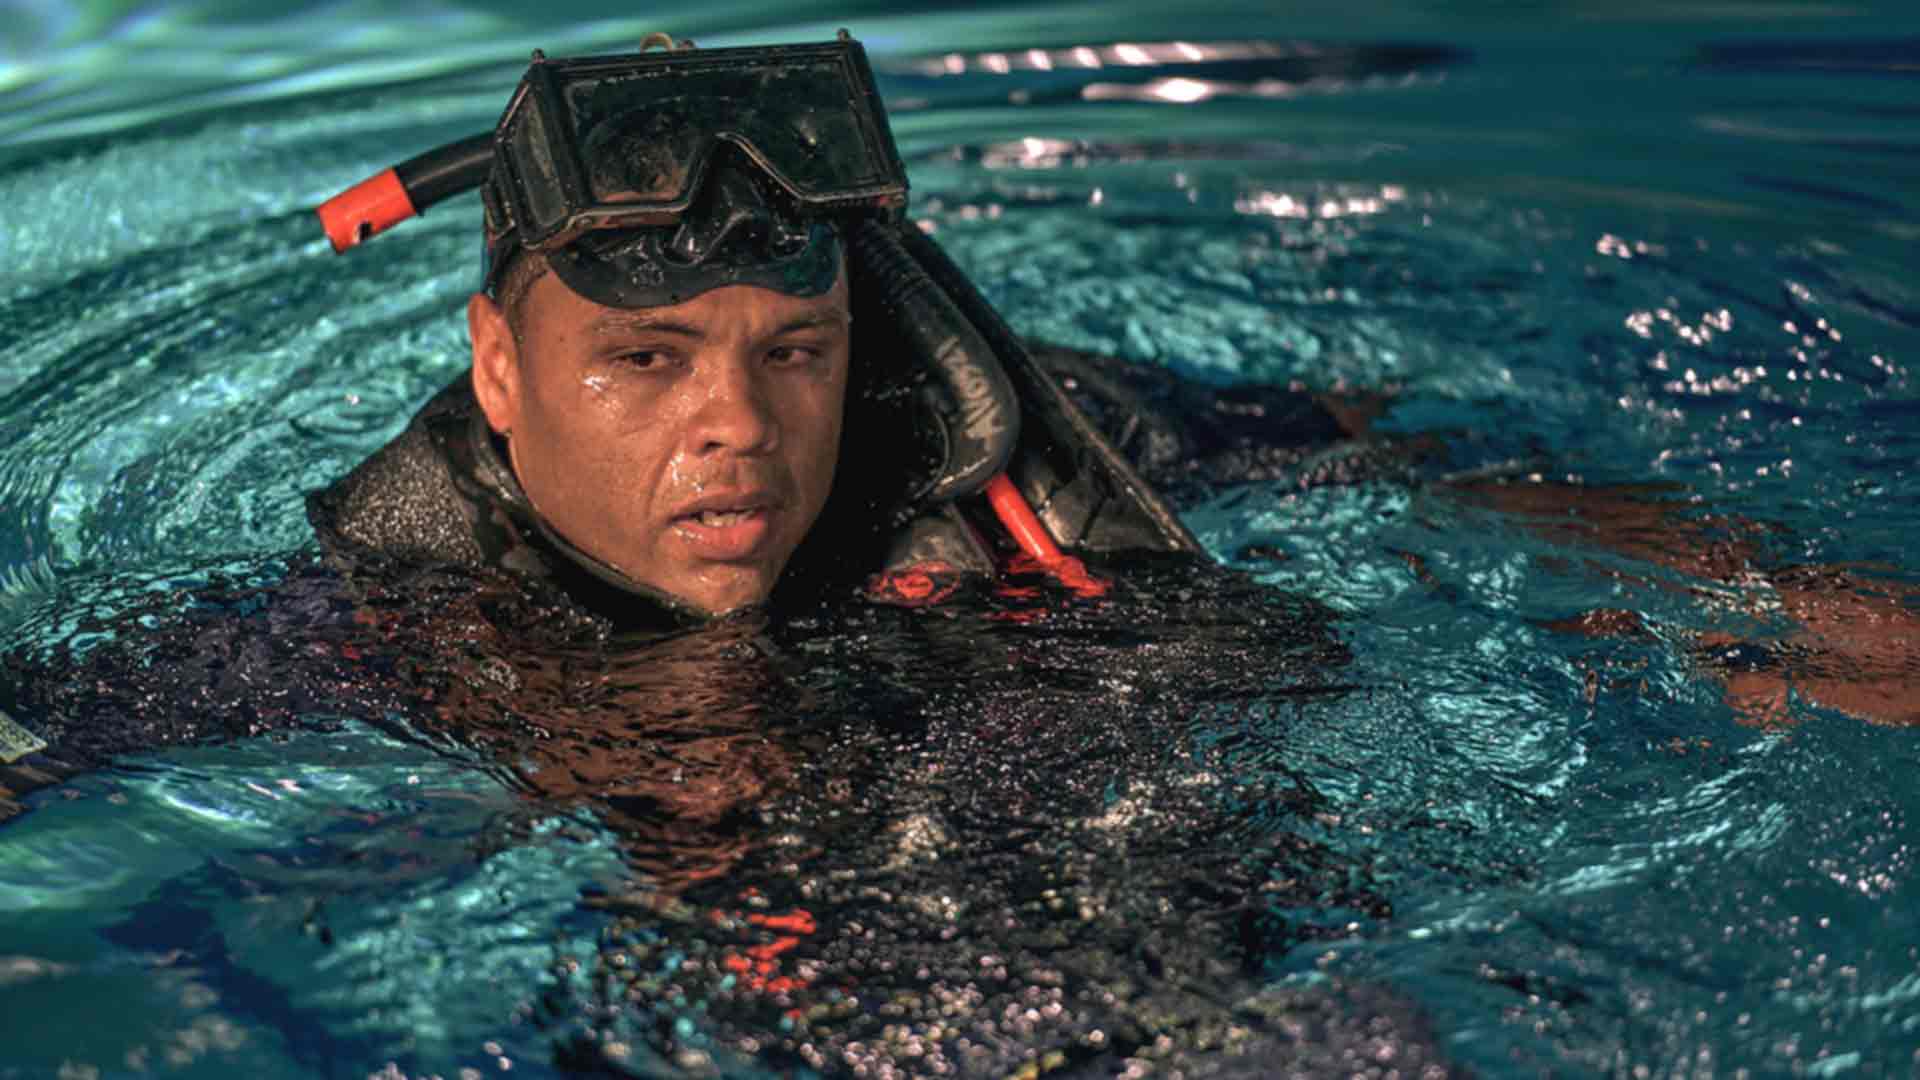 United States Navy Aircrewman Esmelin Villar catches his breath during Search and Rescue Swimmer training.